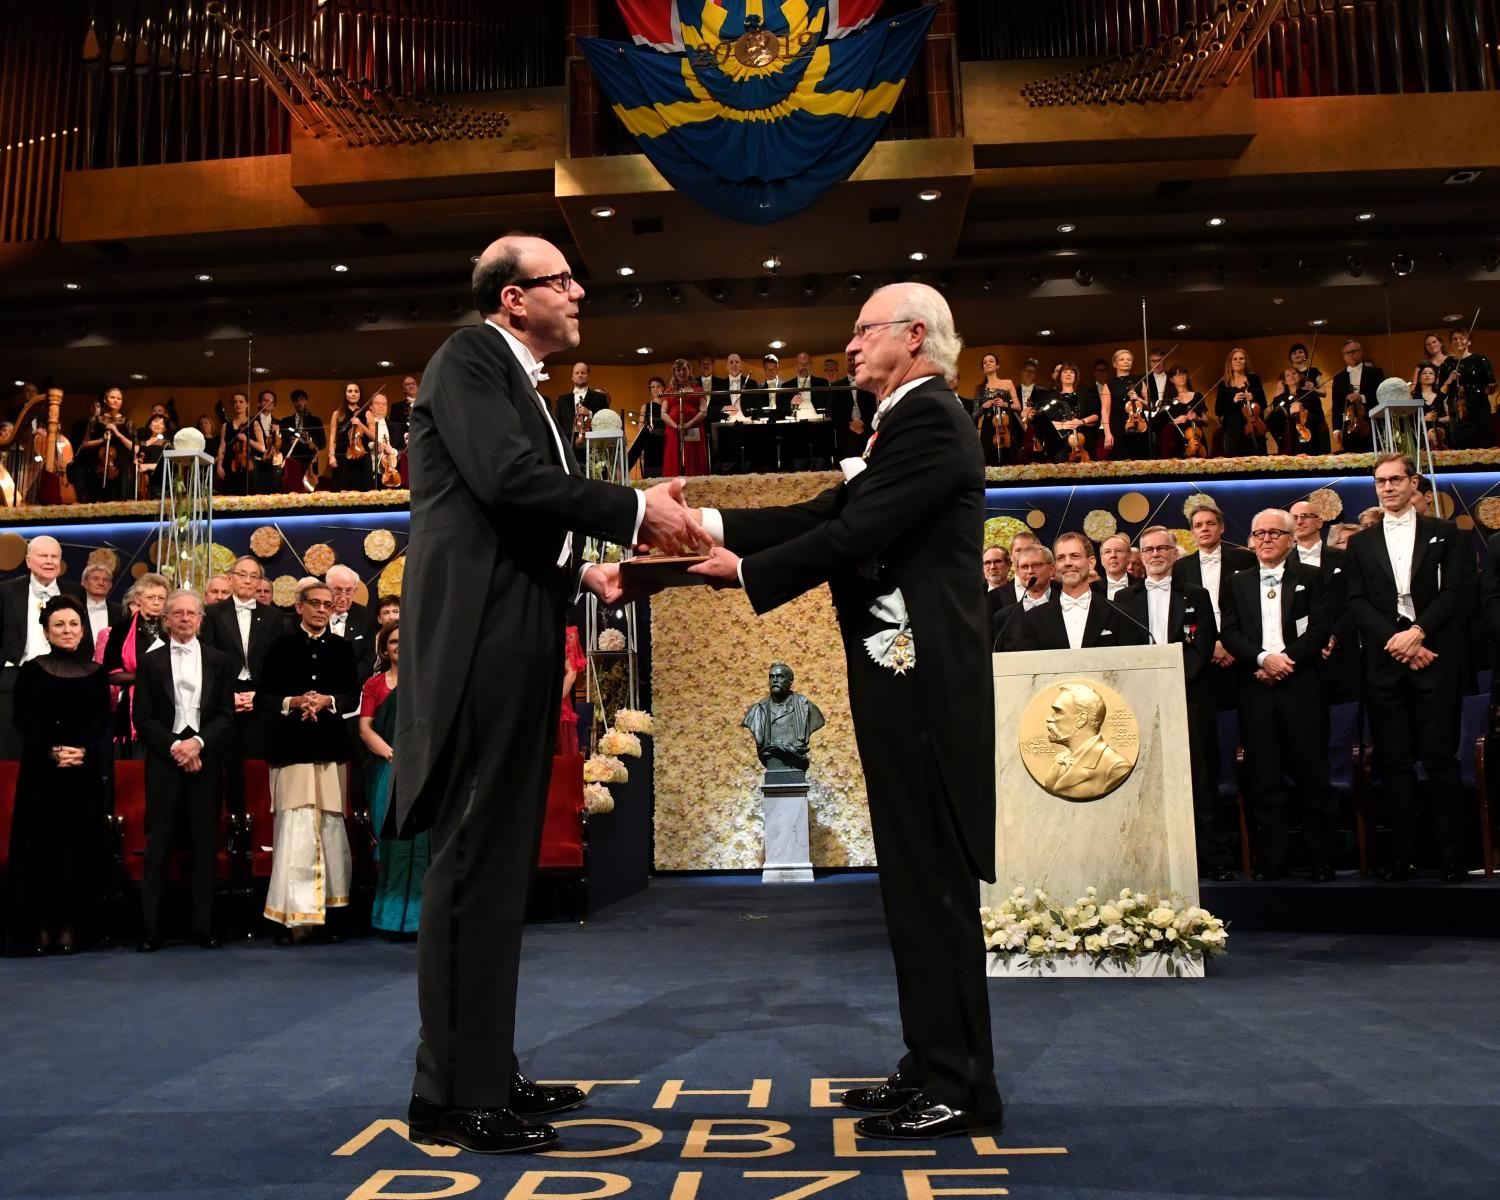 American economist Michael Kremer shakes hands with Sweden's King Carl Gustaf as he receives the Sveriges Riksbank Prize in Economic Sciences in Memory of Alfred Nobel during the Nobel Prize award ceremony at the Stockholm Concert Hall in Stockholm, Sweden December 10, 2019.   TT News Agency/Jonas Ekstromer via REUTERS      ATTENTION EDITORS - THIS IMAGE WAS PROVIDED BY A THIRD PARTY. SWEDEN OUT. NO COMMERCIAL OR EDITORIAL SALES IN SWEDEN. - RC2ISD9XOYP8